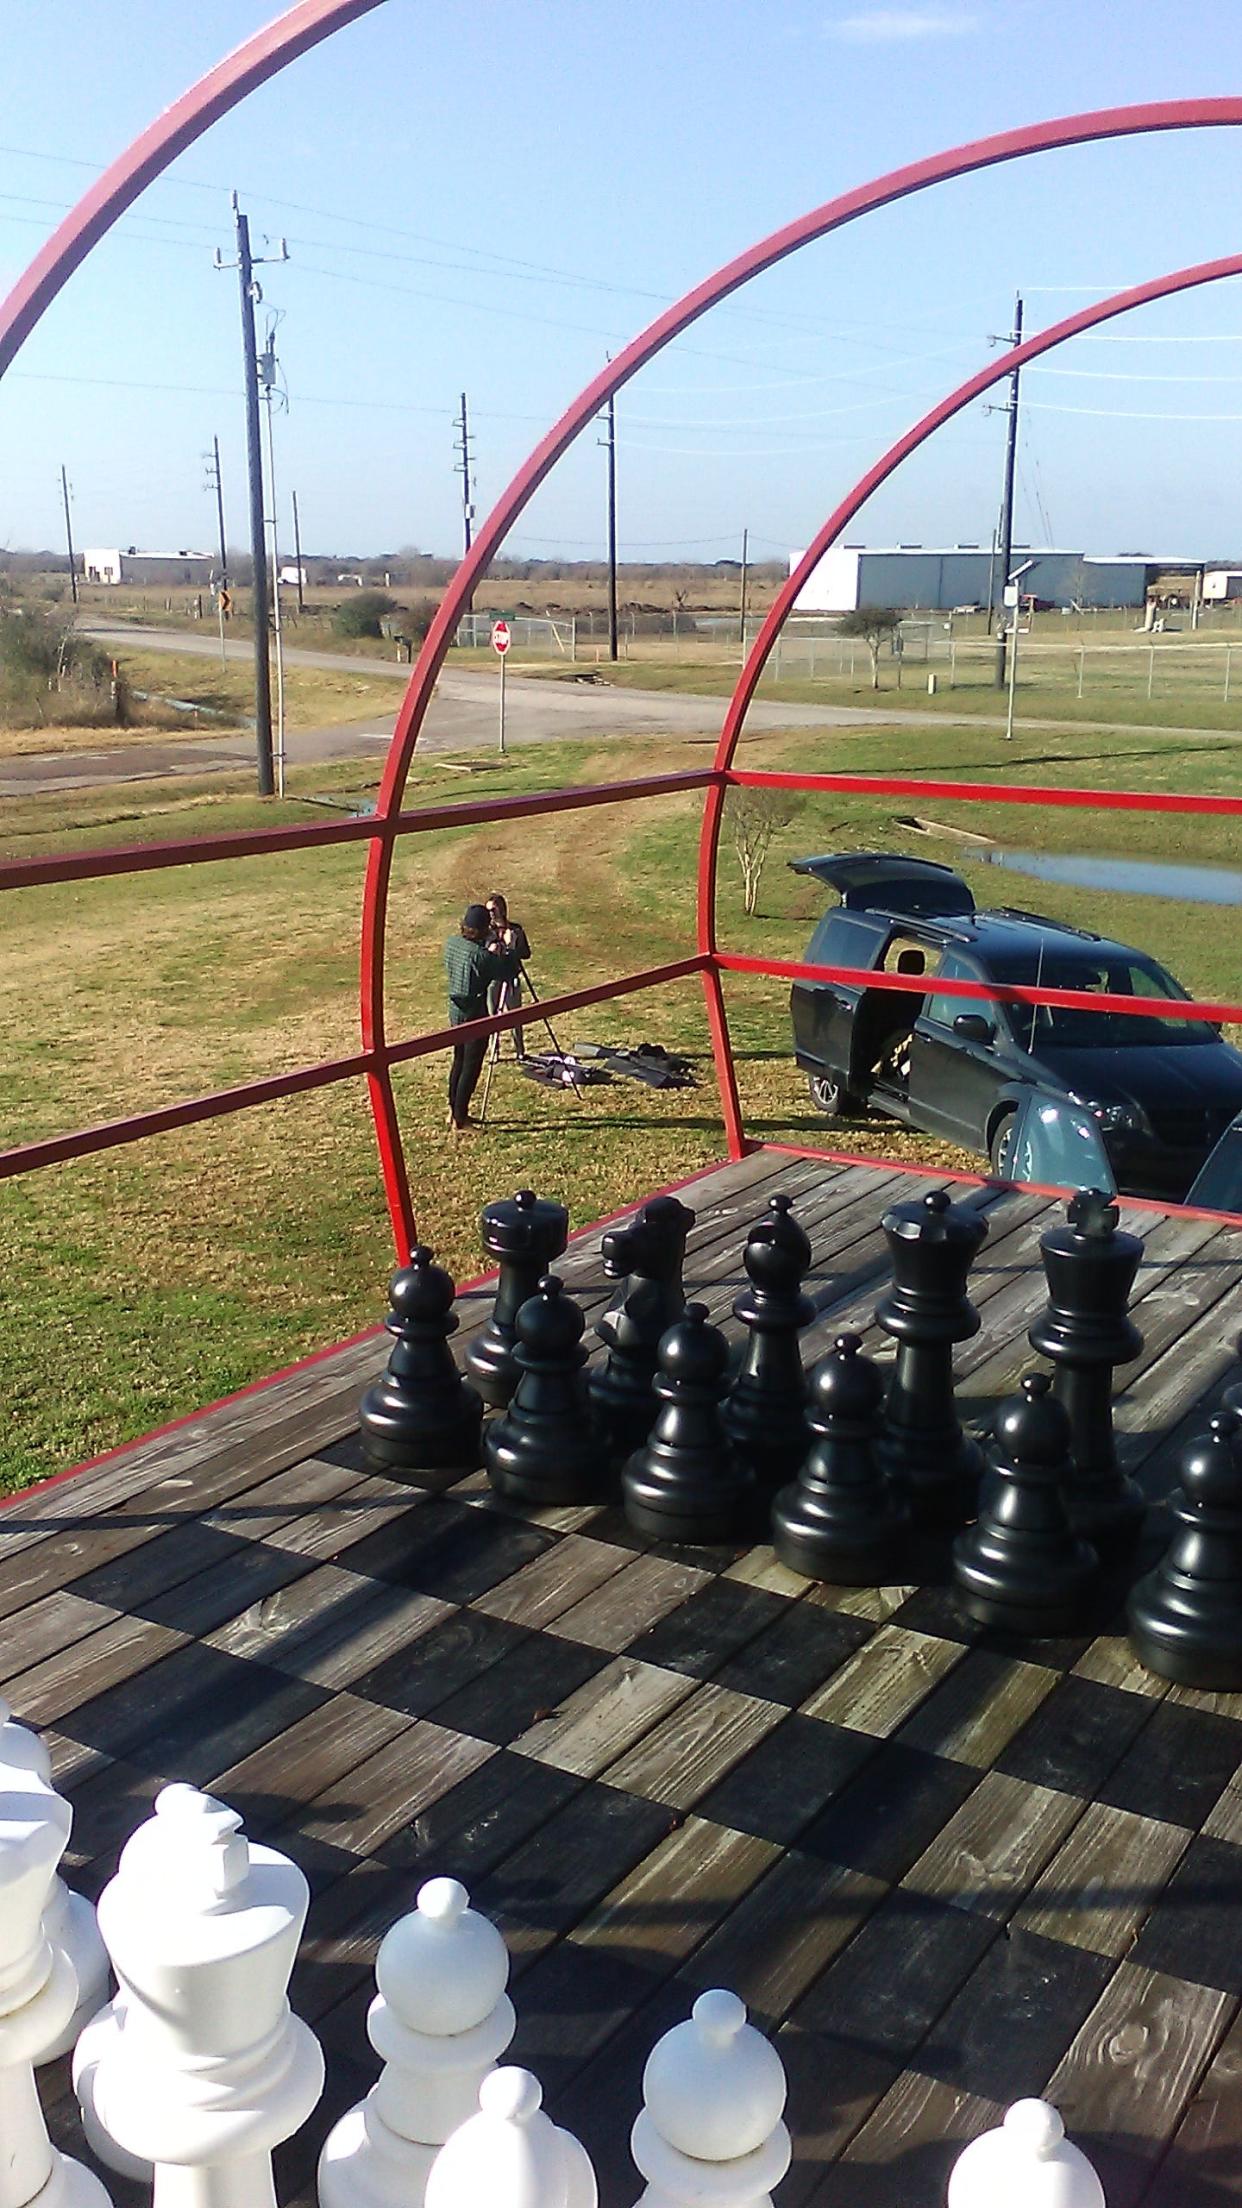 Life size chess set on the back of a renovated MD-80 plane house.